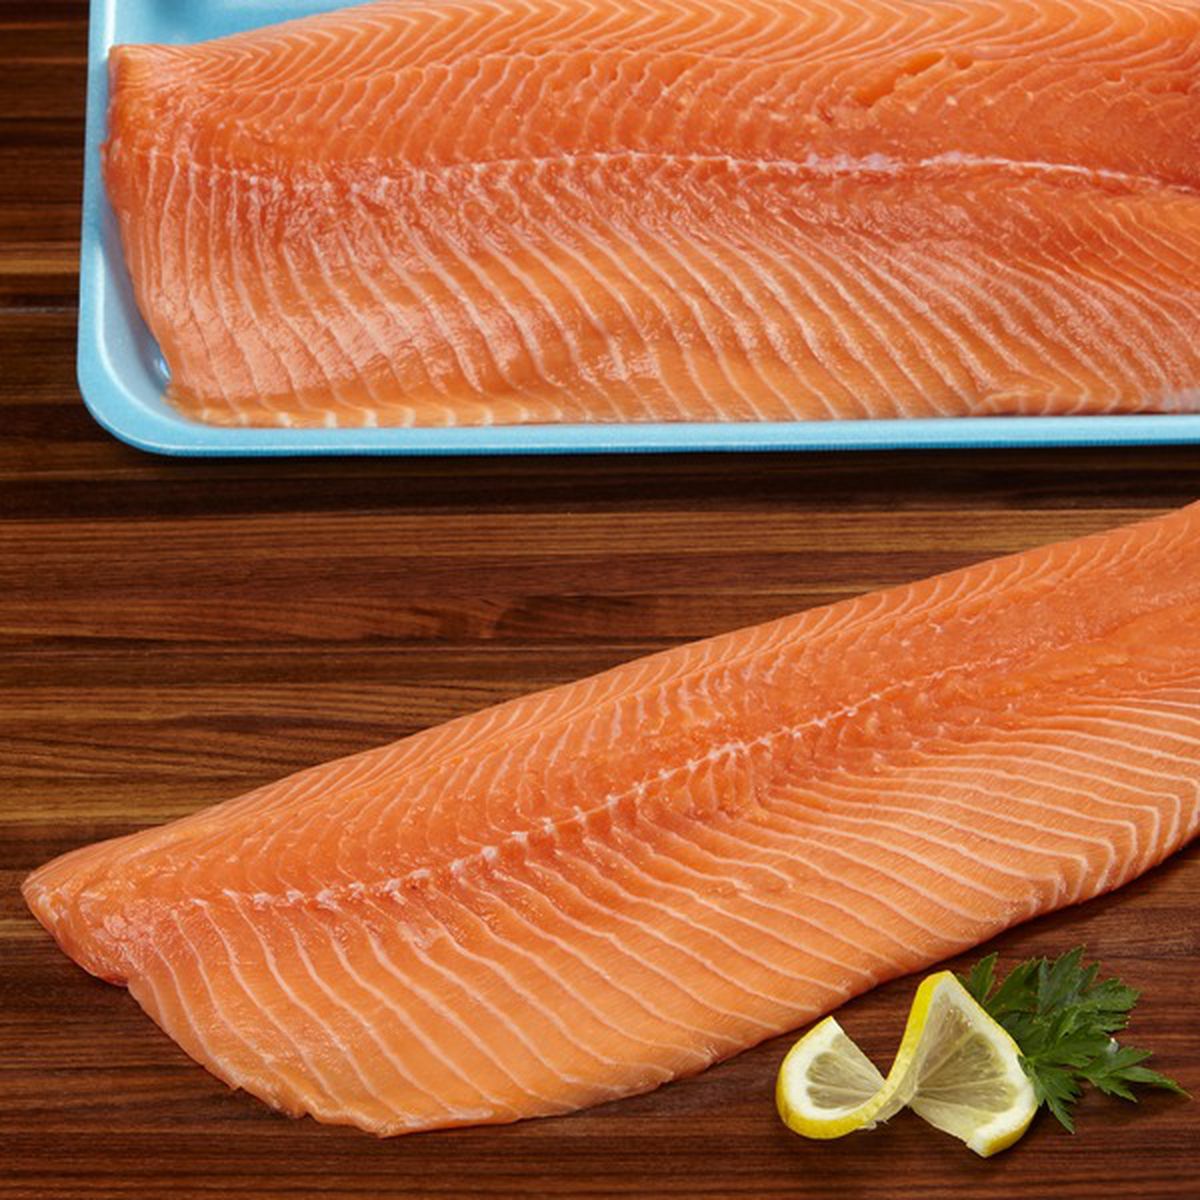 Salmon Fillet Price - How do you Price a Switches?